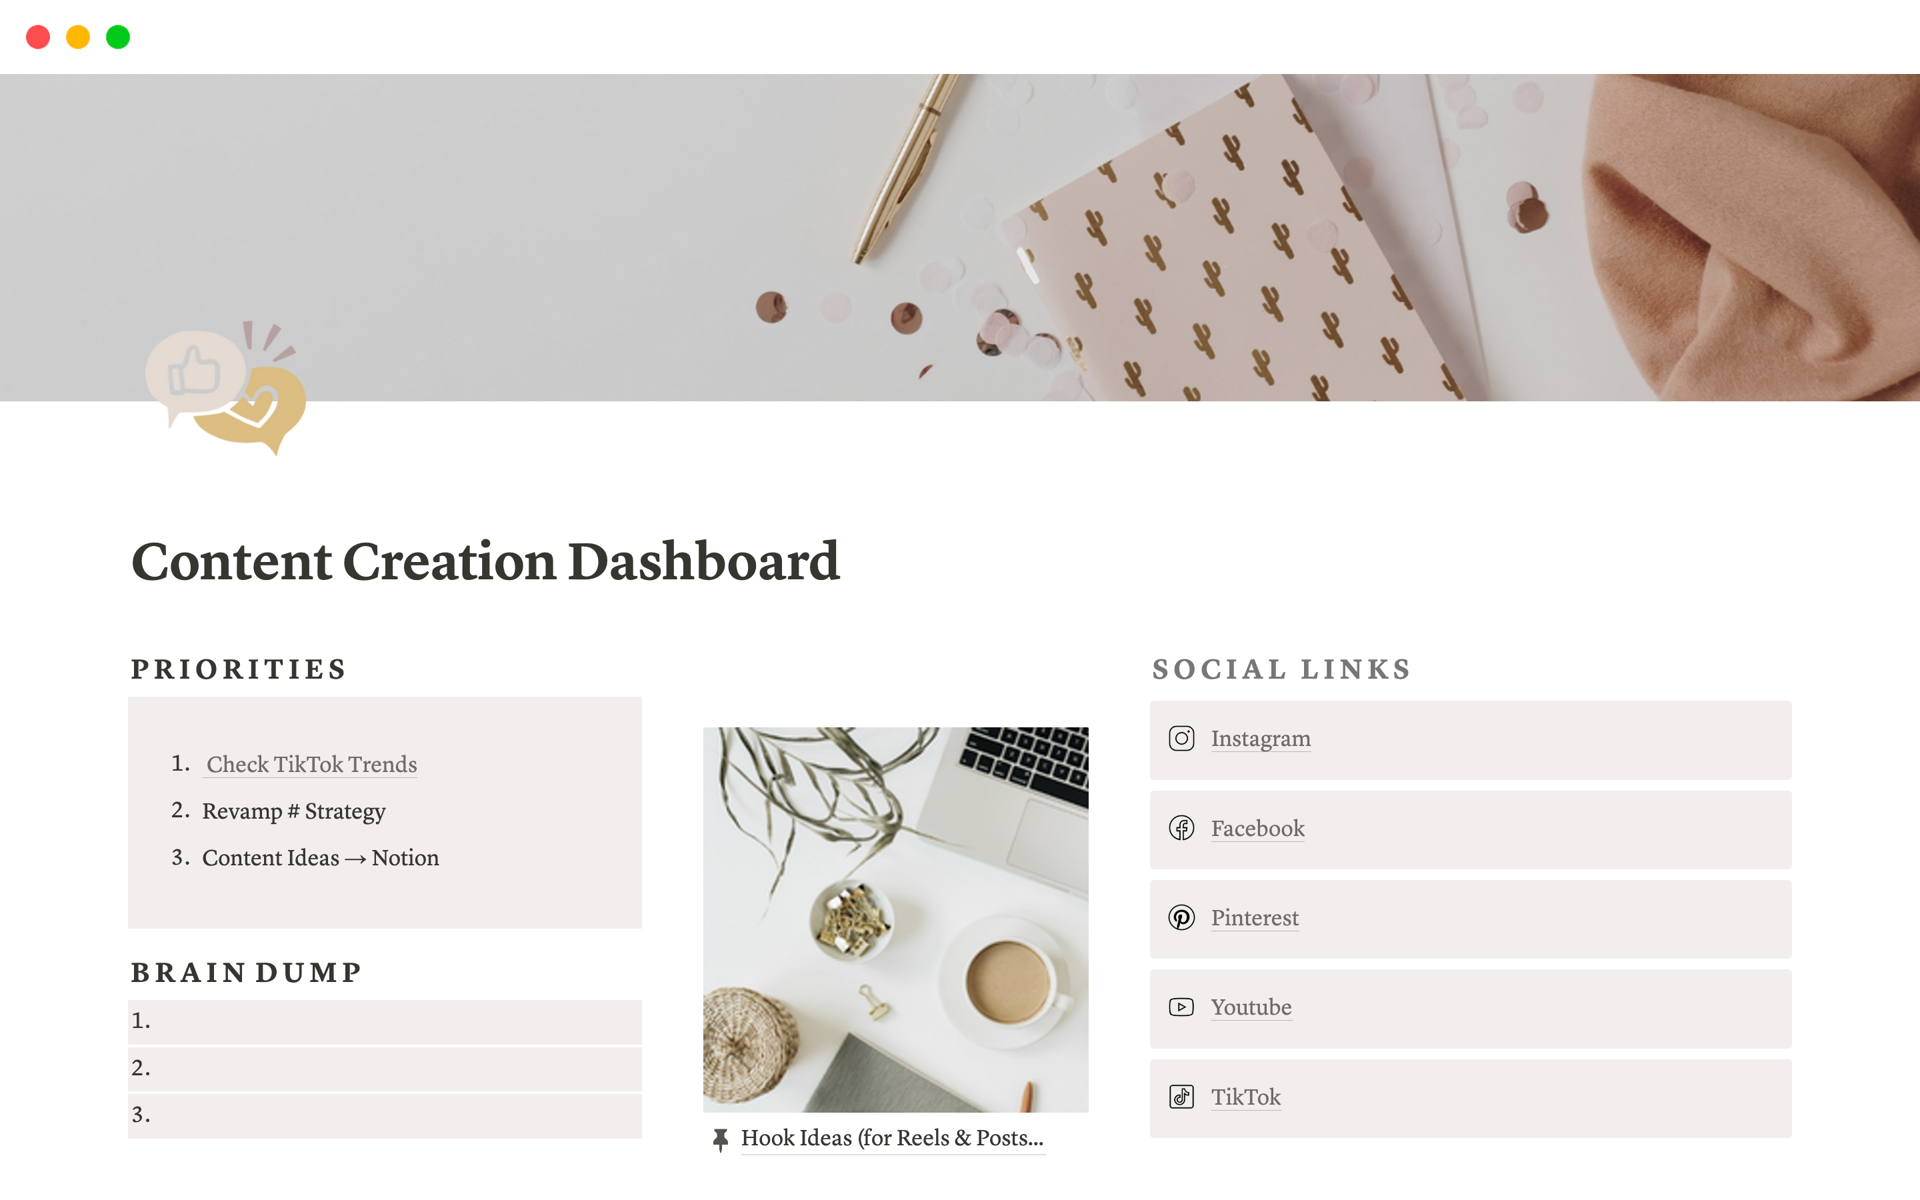 You want to organize your life and start posting consistently, but creating a social media content planner in Notion from scratch is intimidating. Where do you even start?! This template can help you get started in under 5 minutes with instant download.